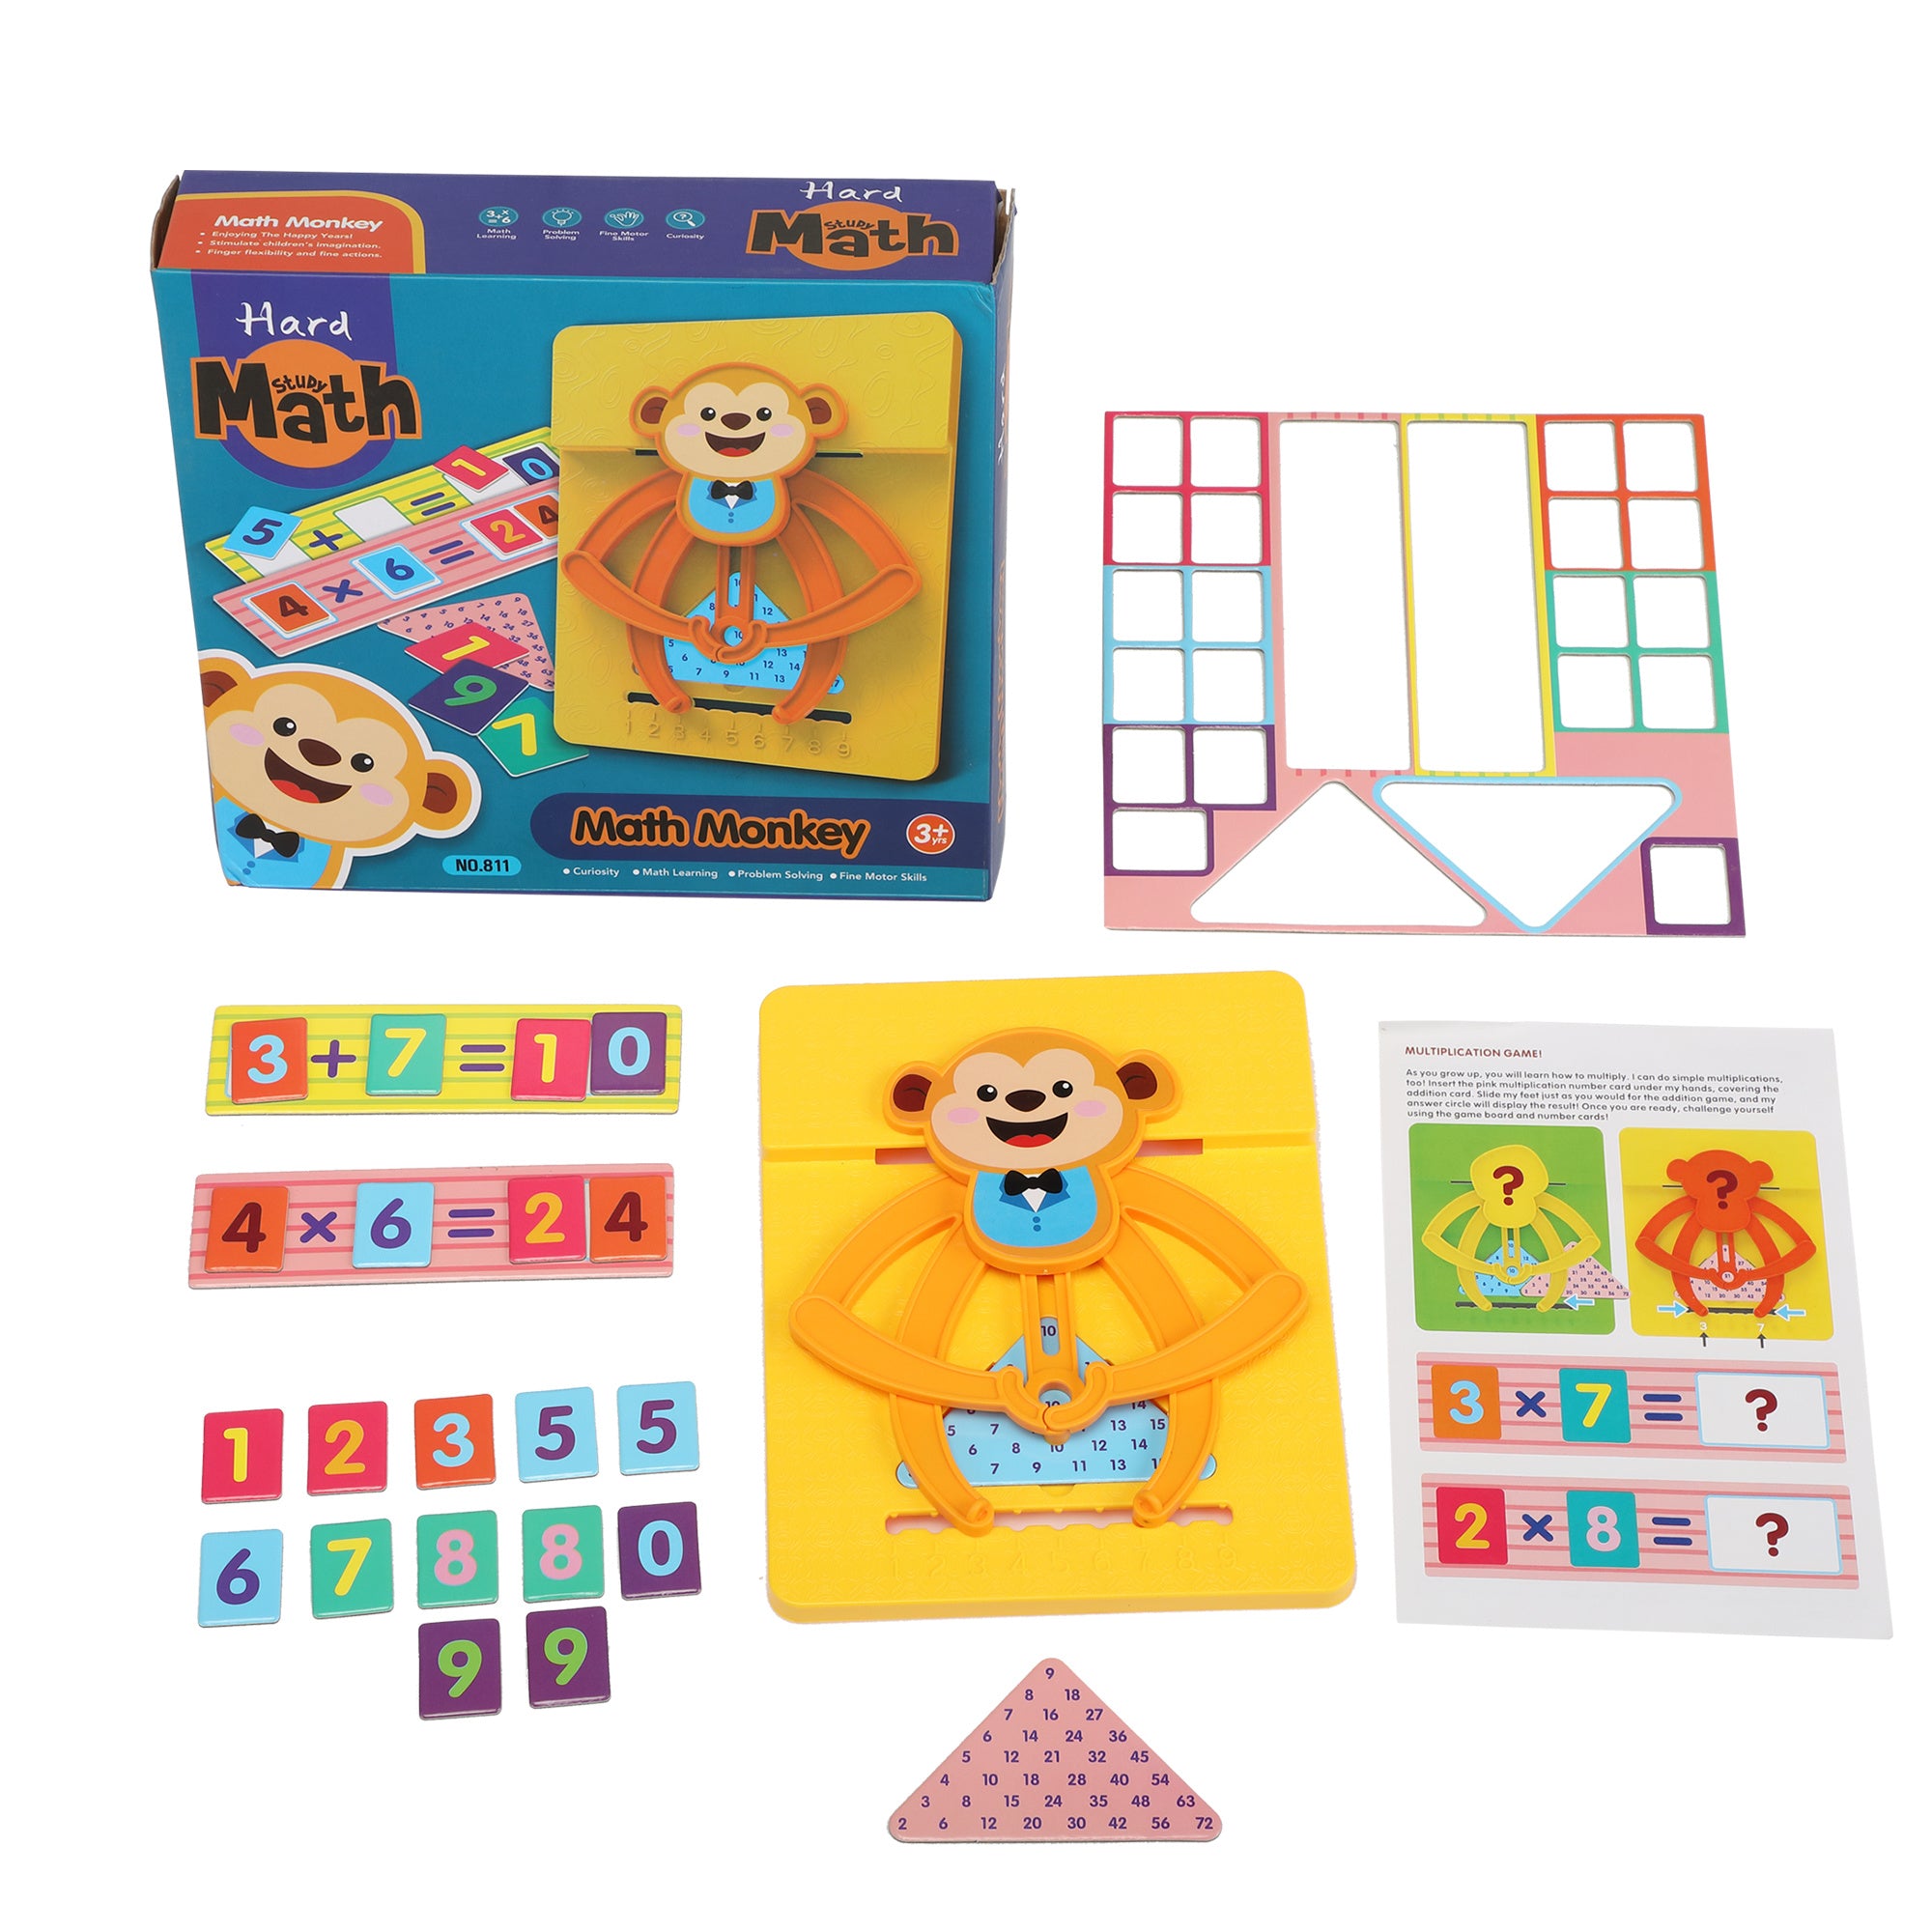 Math Monkey Educational Toys for Toddles, Preschool Number Learning Fun Game for Boys & Girls, Monkey Counting Gift for kids XH